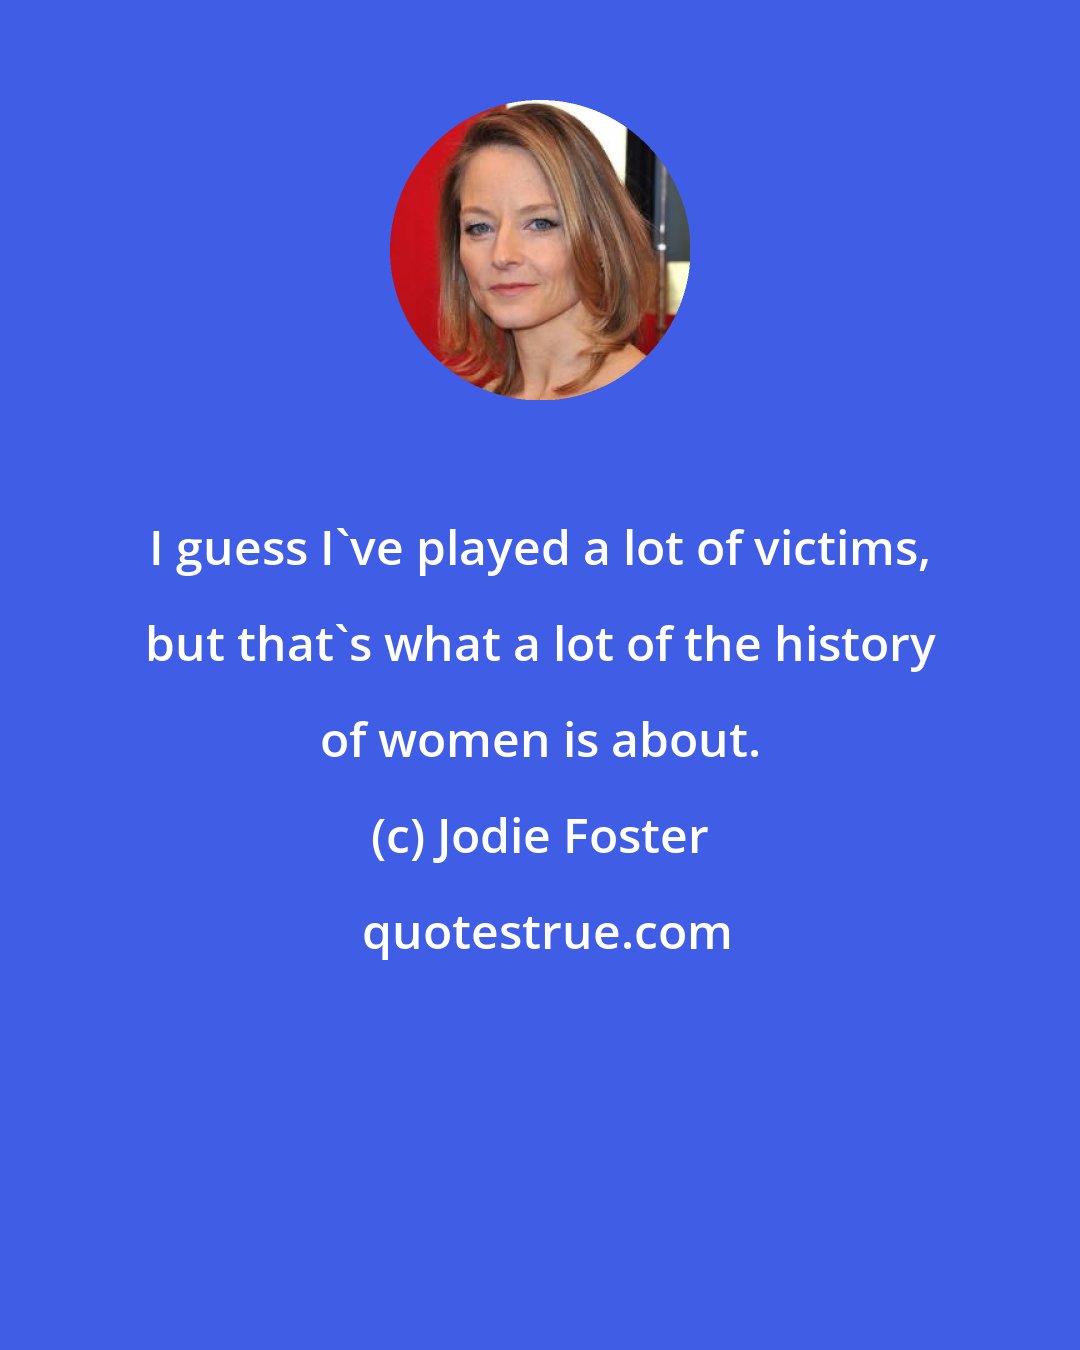 Jodie Foster: I guess I've played a lot of victims, but that's what a lot of the history of women is about.